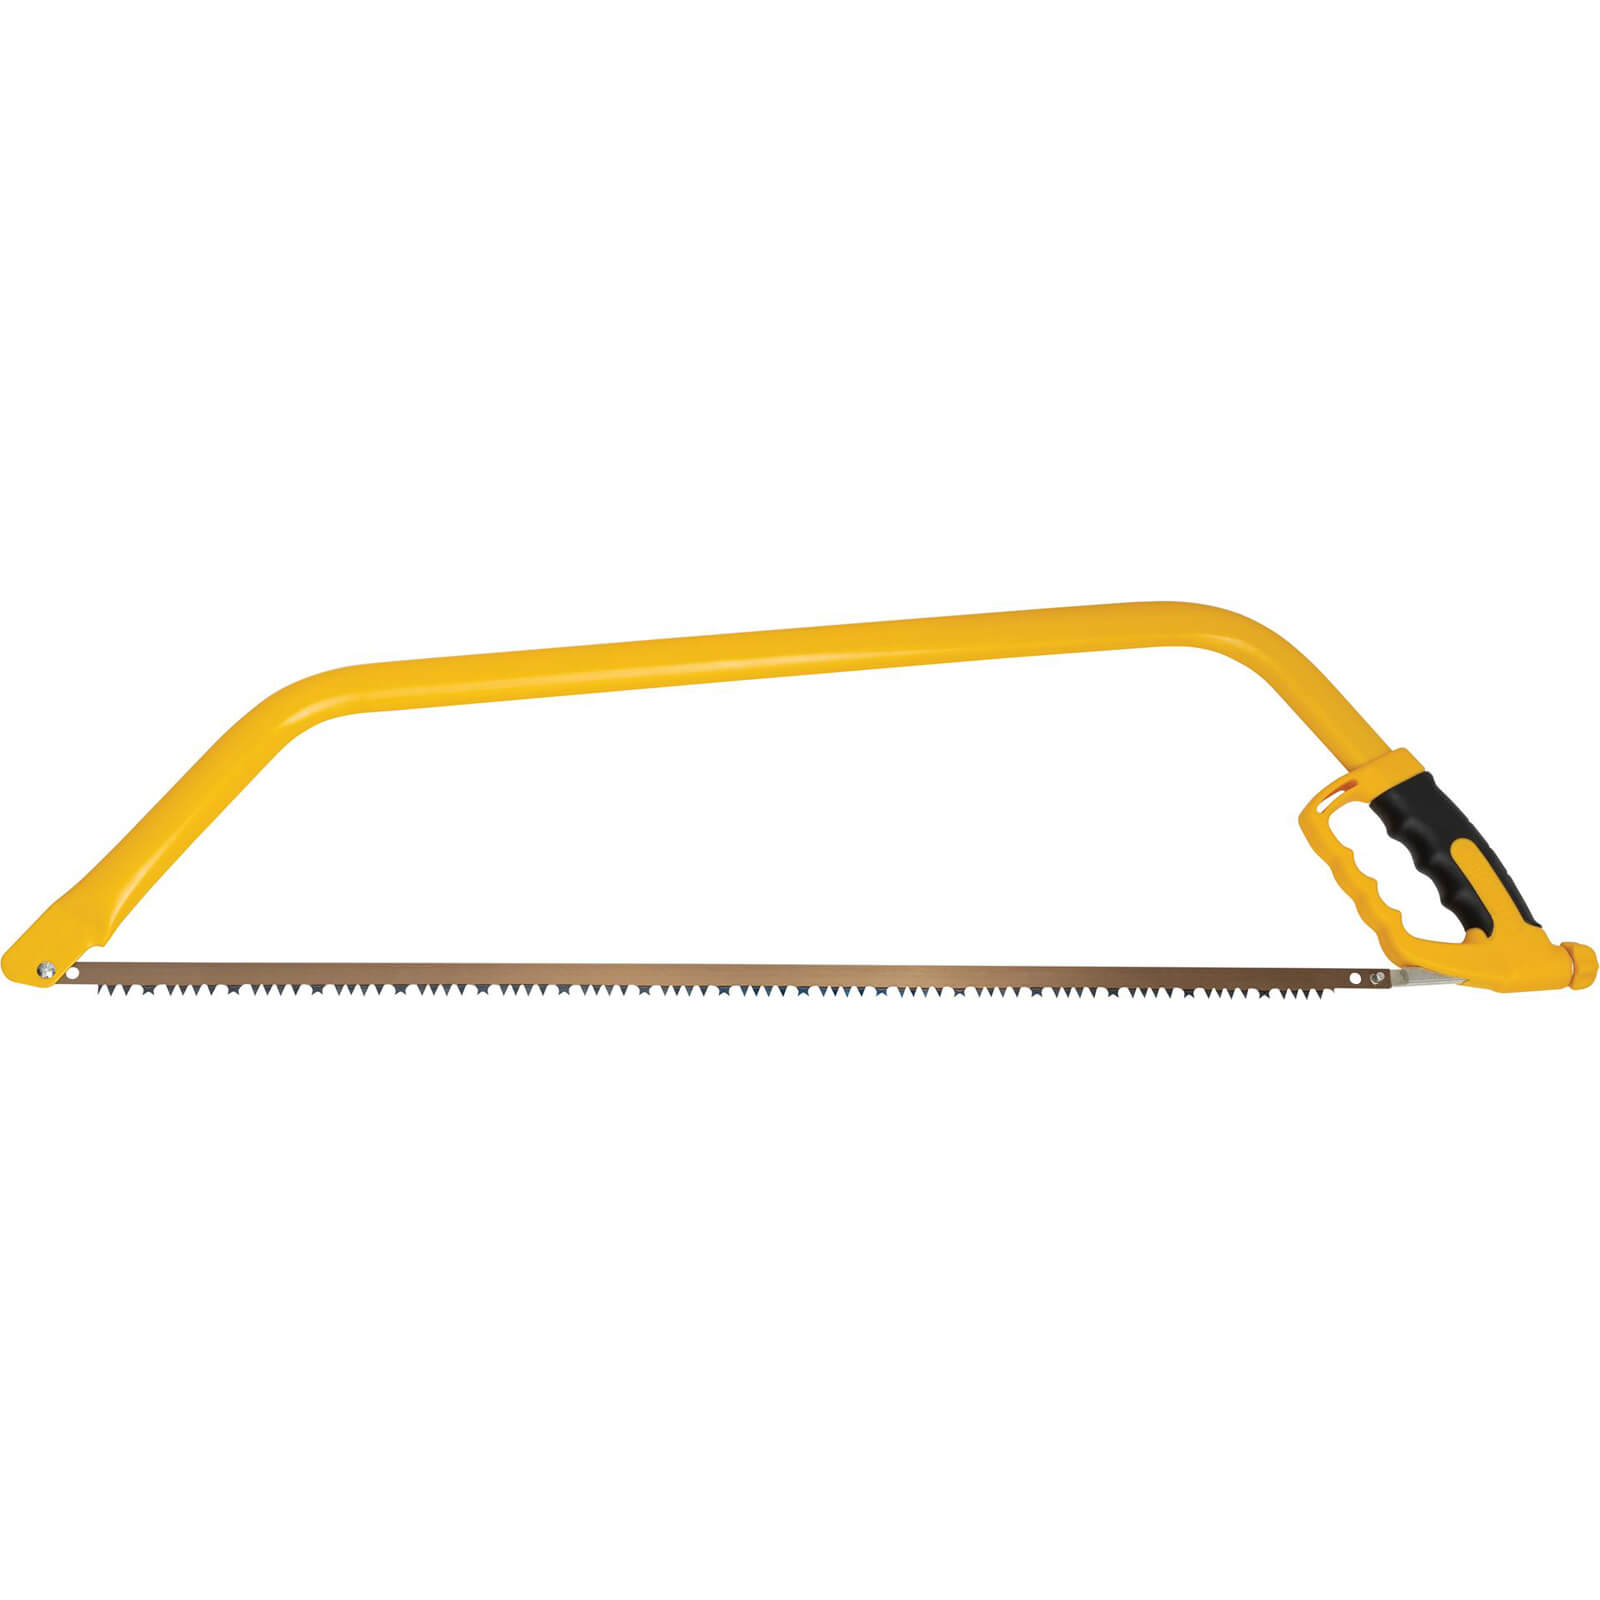 Image of Roughneck Bow Saw with Soft Grip Handle 30" / 700mm